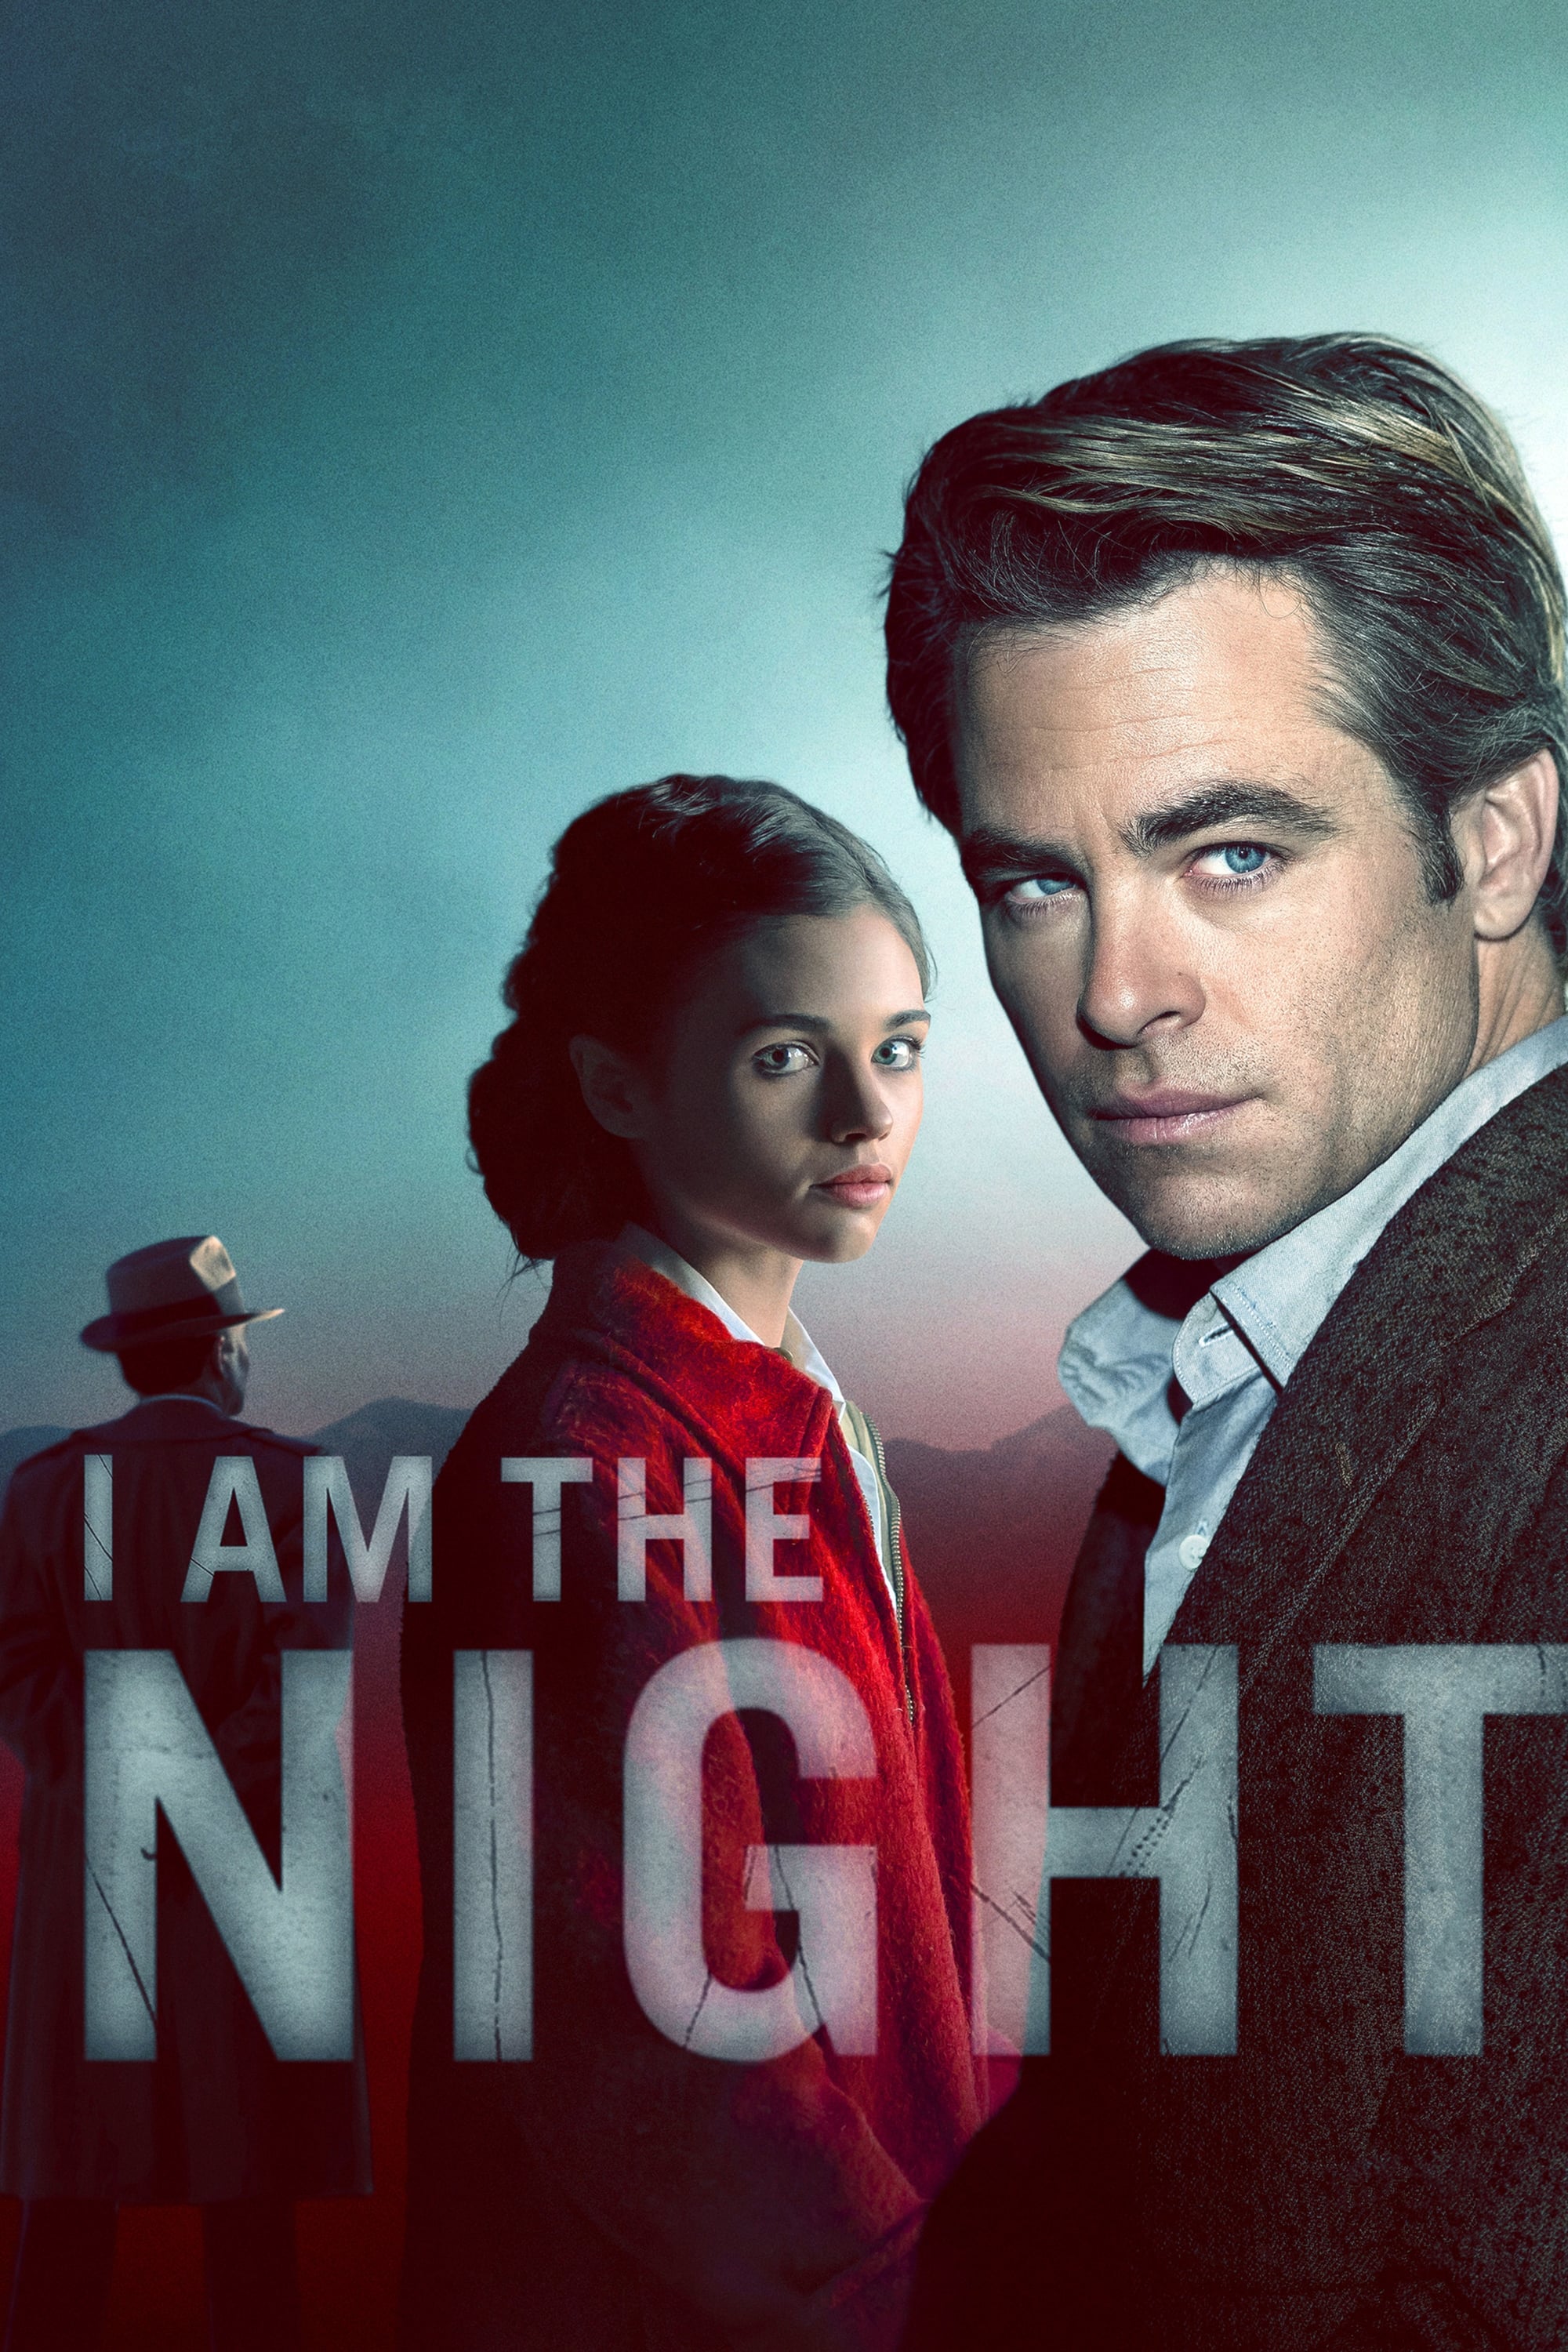 I Am the Night TV Shows About Racism